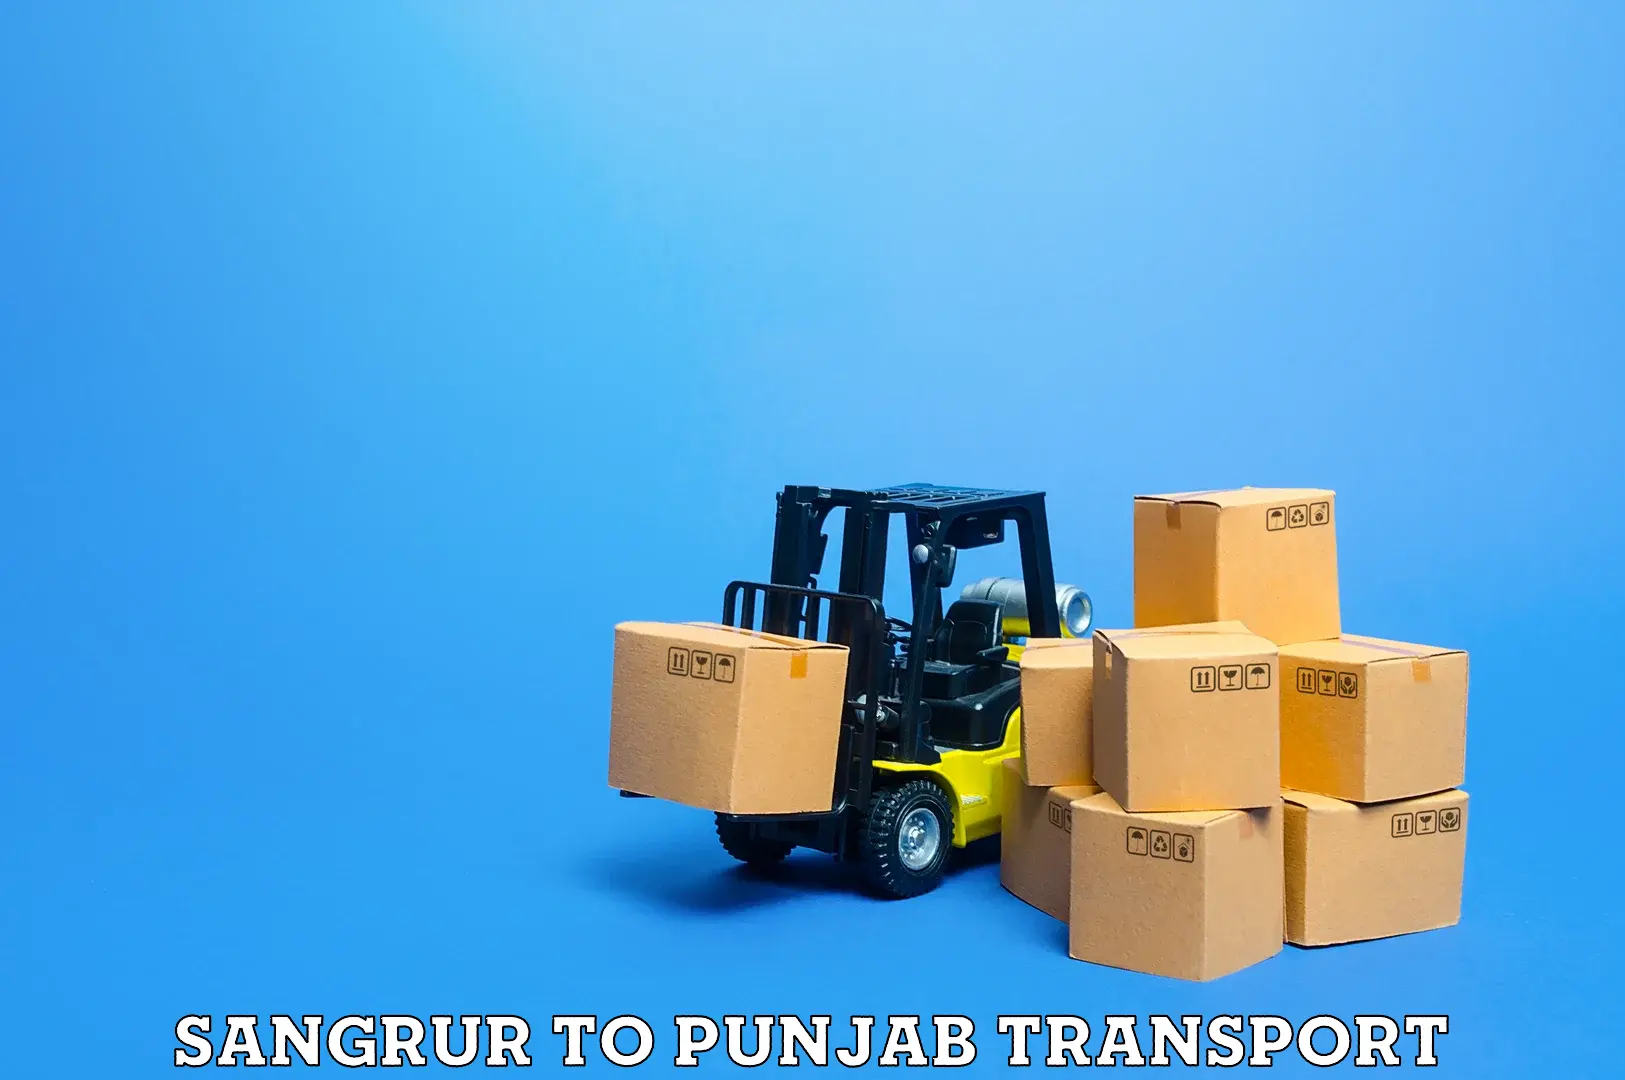 Pick up transport service in Sangrur to Mehta Chowk